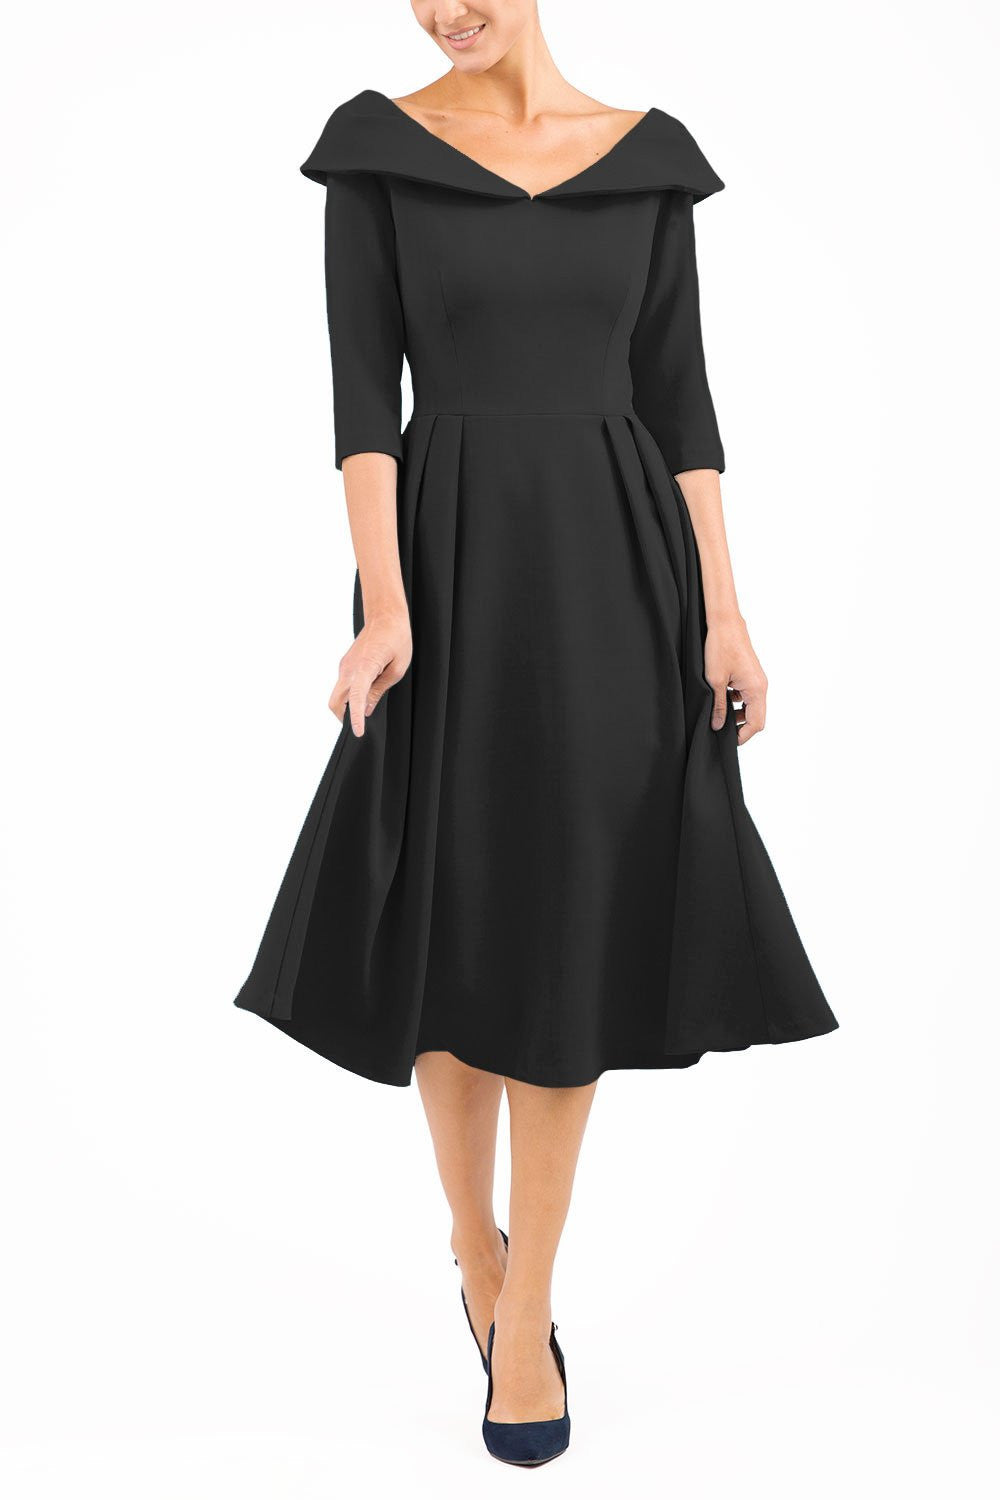 Model wearing Diva Catwalk Chesterton Sleeved dress with oversized collar detail and a-line swing pleated skirt in colour black front